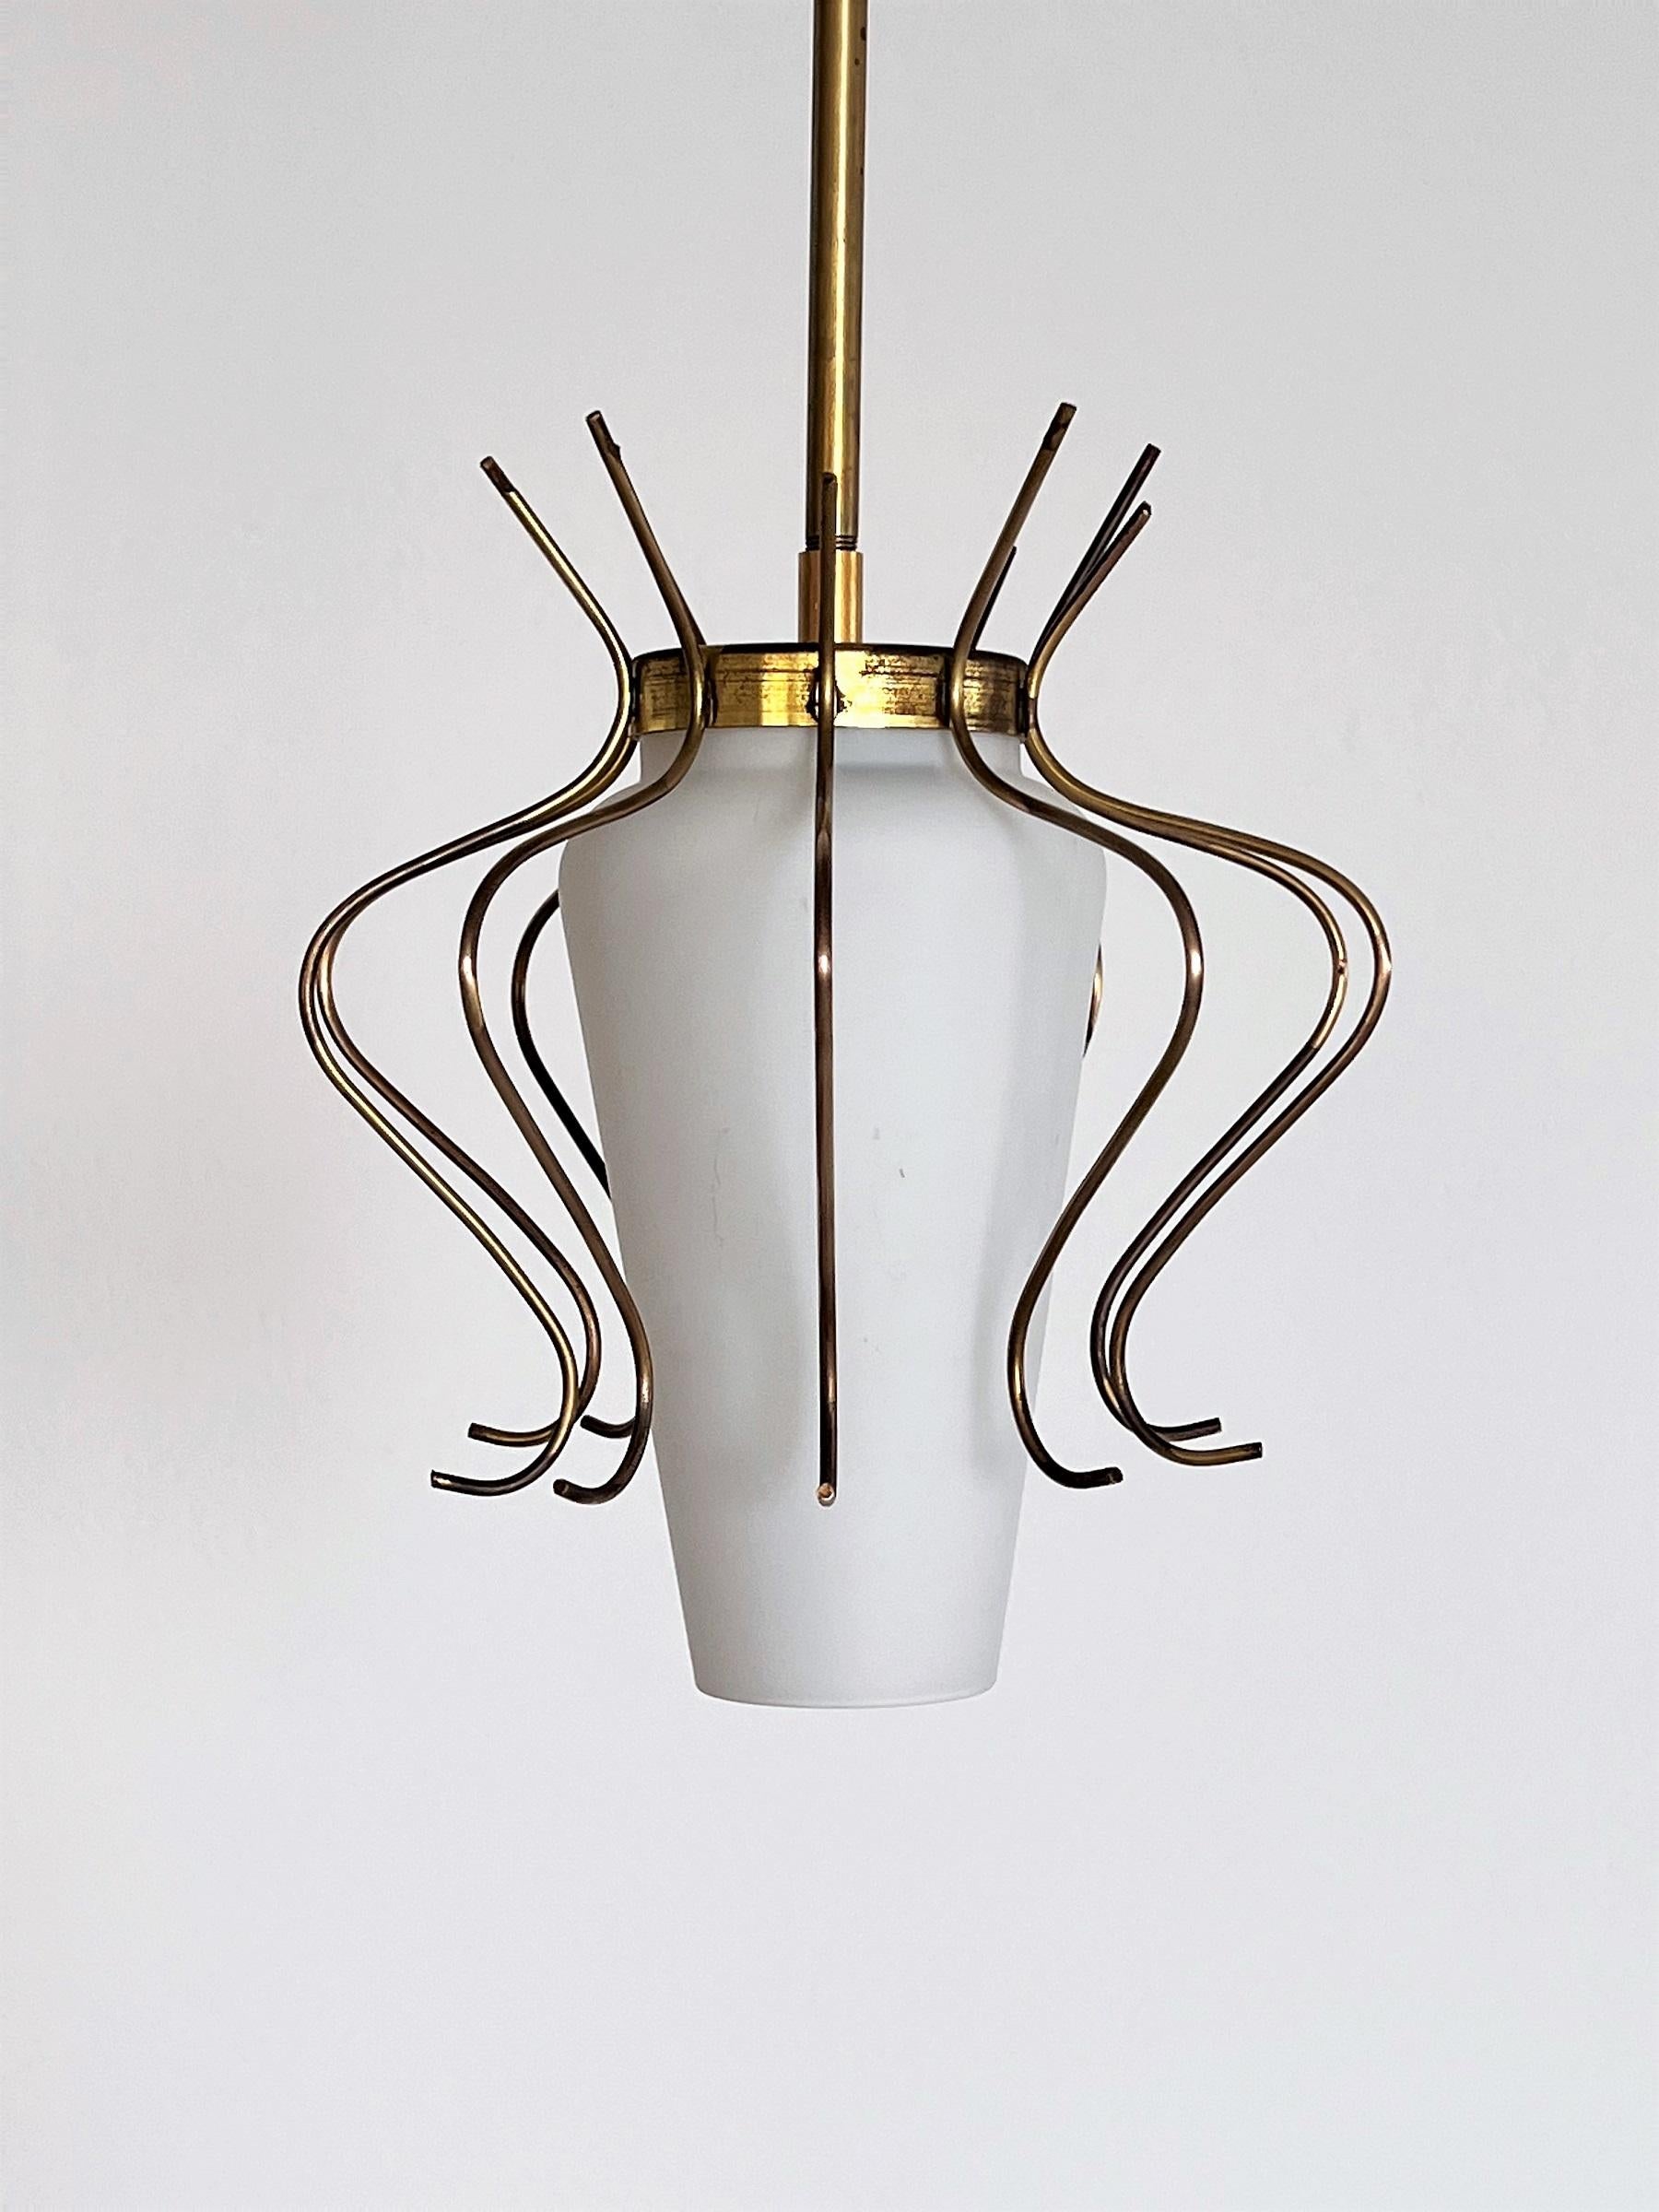 A wonderful and delicate ceiling lamp, made in the 50s in Italy.
The central opaline white glass is held with a clamp inside the lamp.
Around the lamp are curly details made of brass.
The lamp holder as well as the rod to the ceiling and the